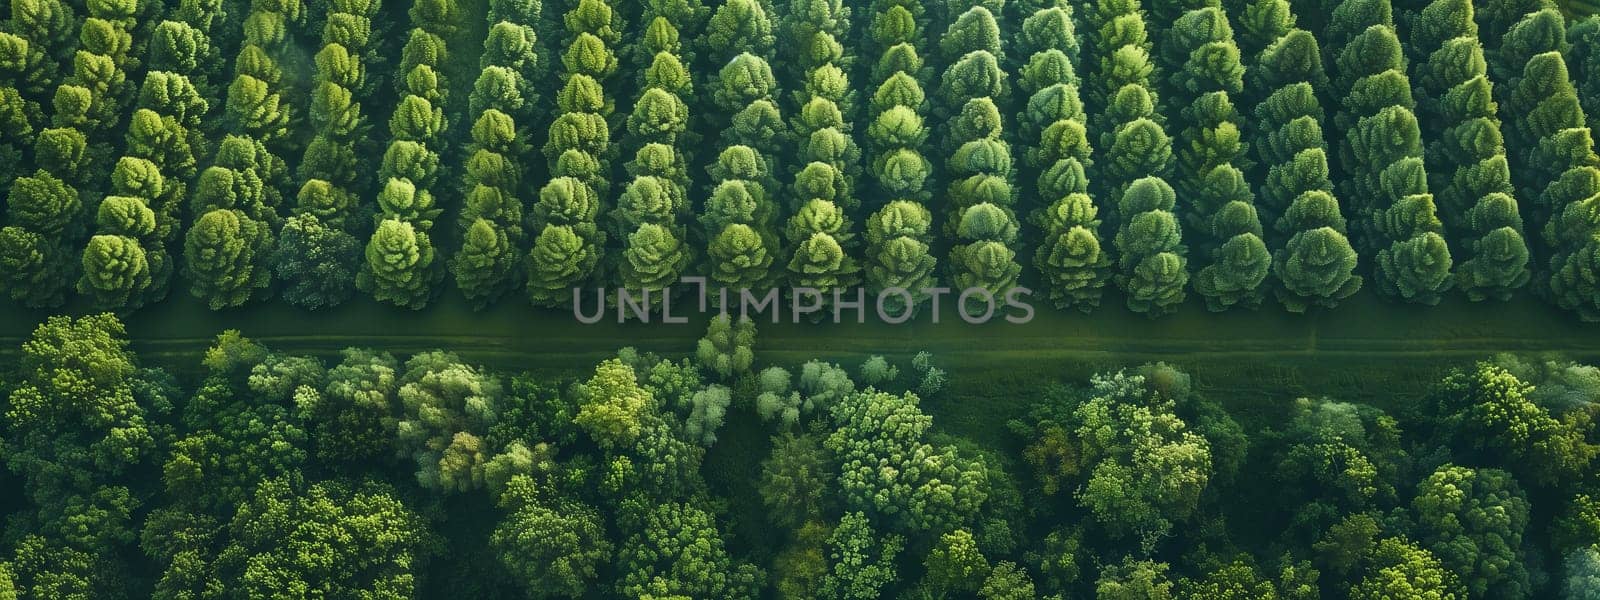 A view from above of a dense forest with lush green terrestrial plants, grass, and conifer trees. A river meanders through, creating a beautiful pattern in the landscape